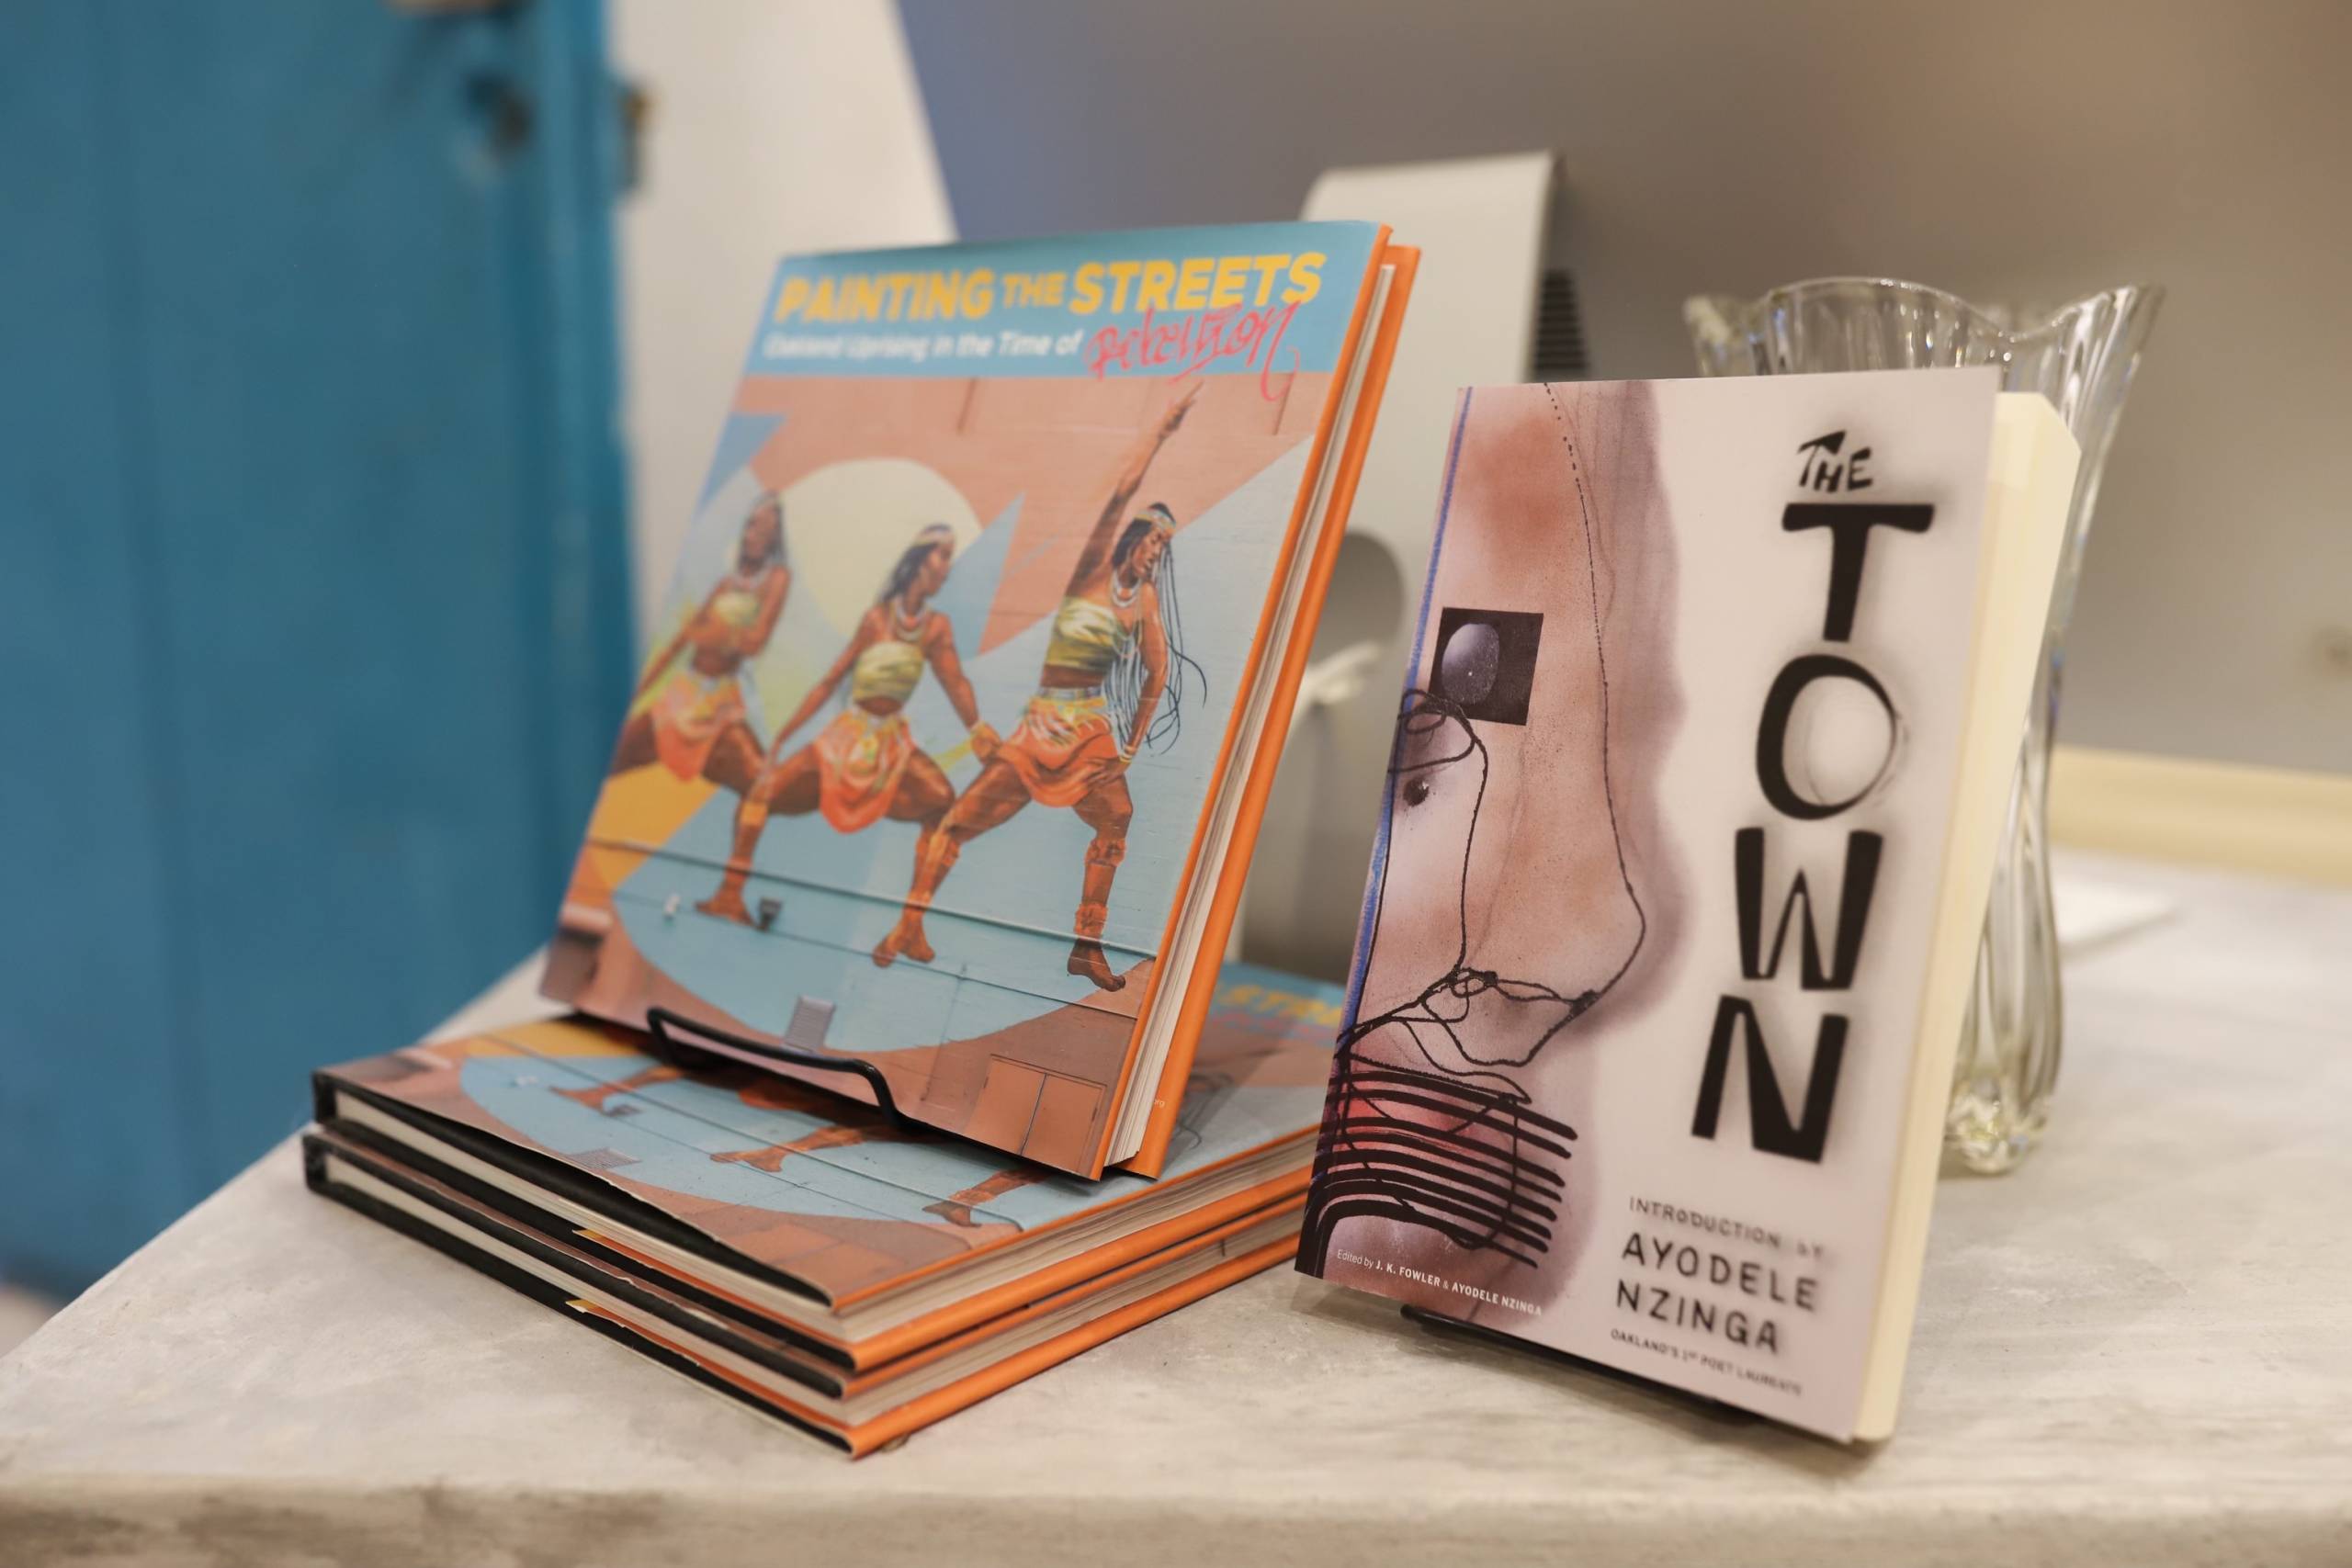 books about Oakland art are on display at a shop in Mexico